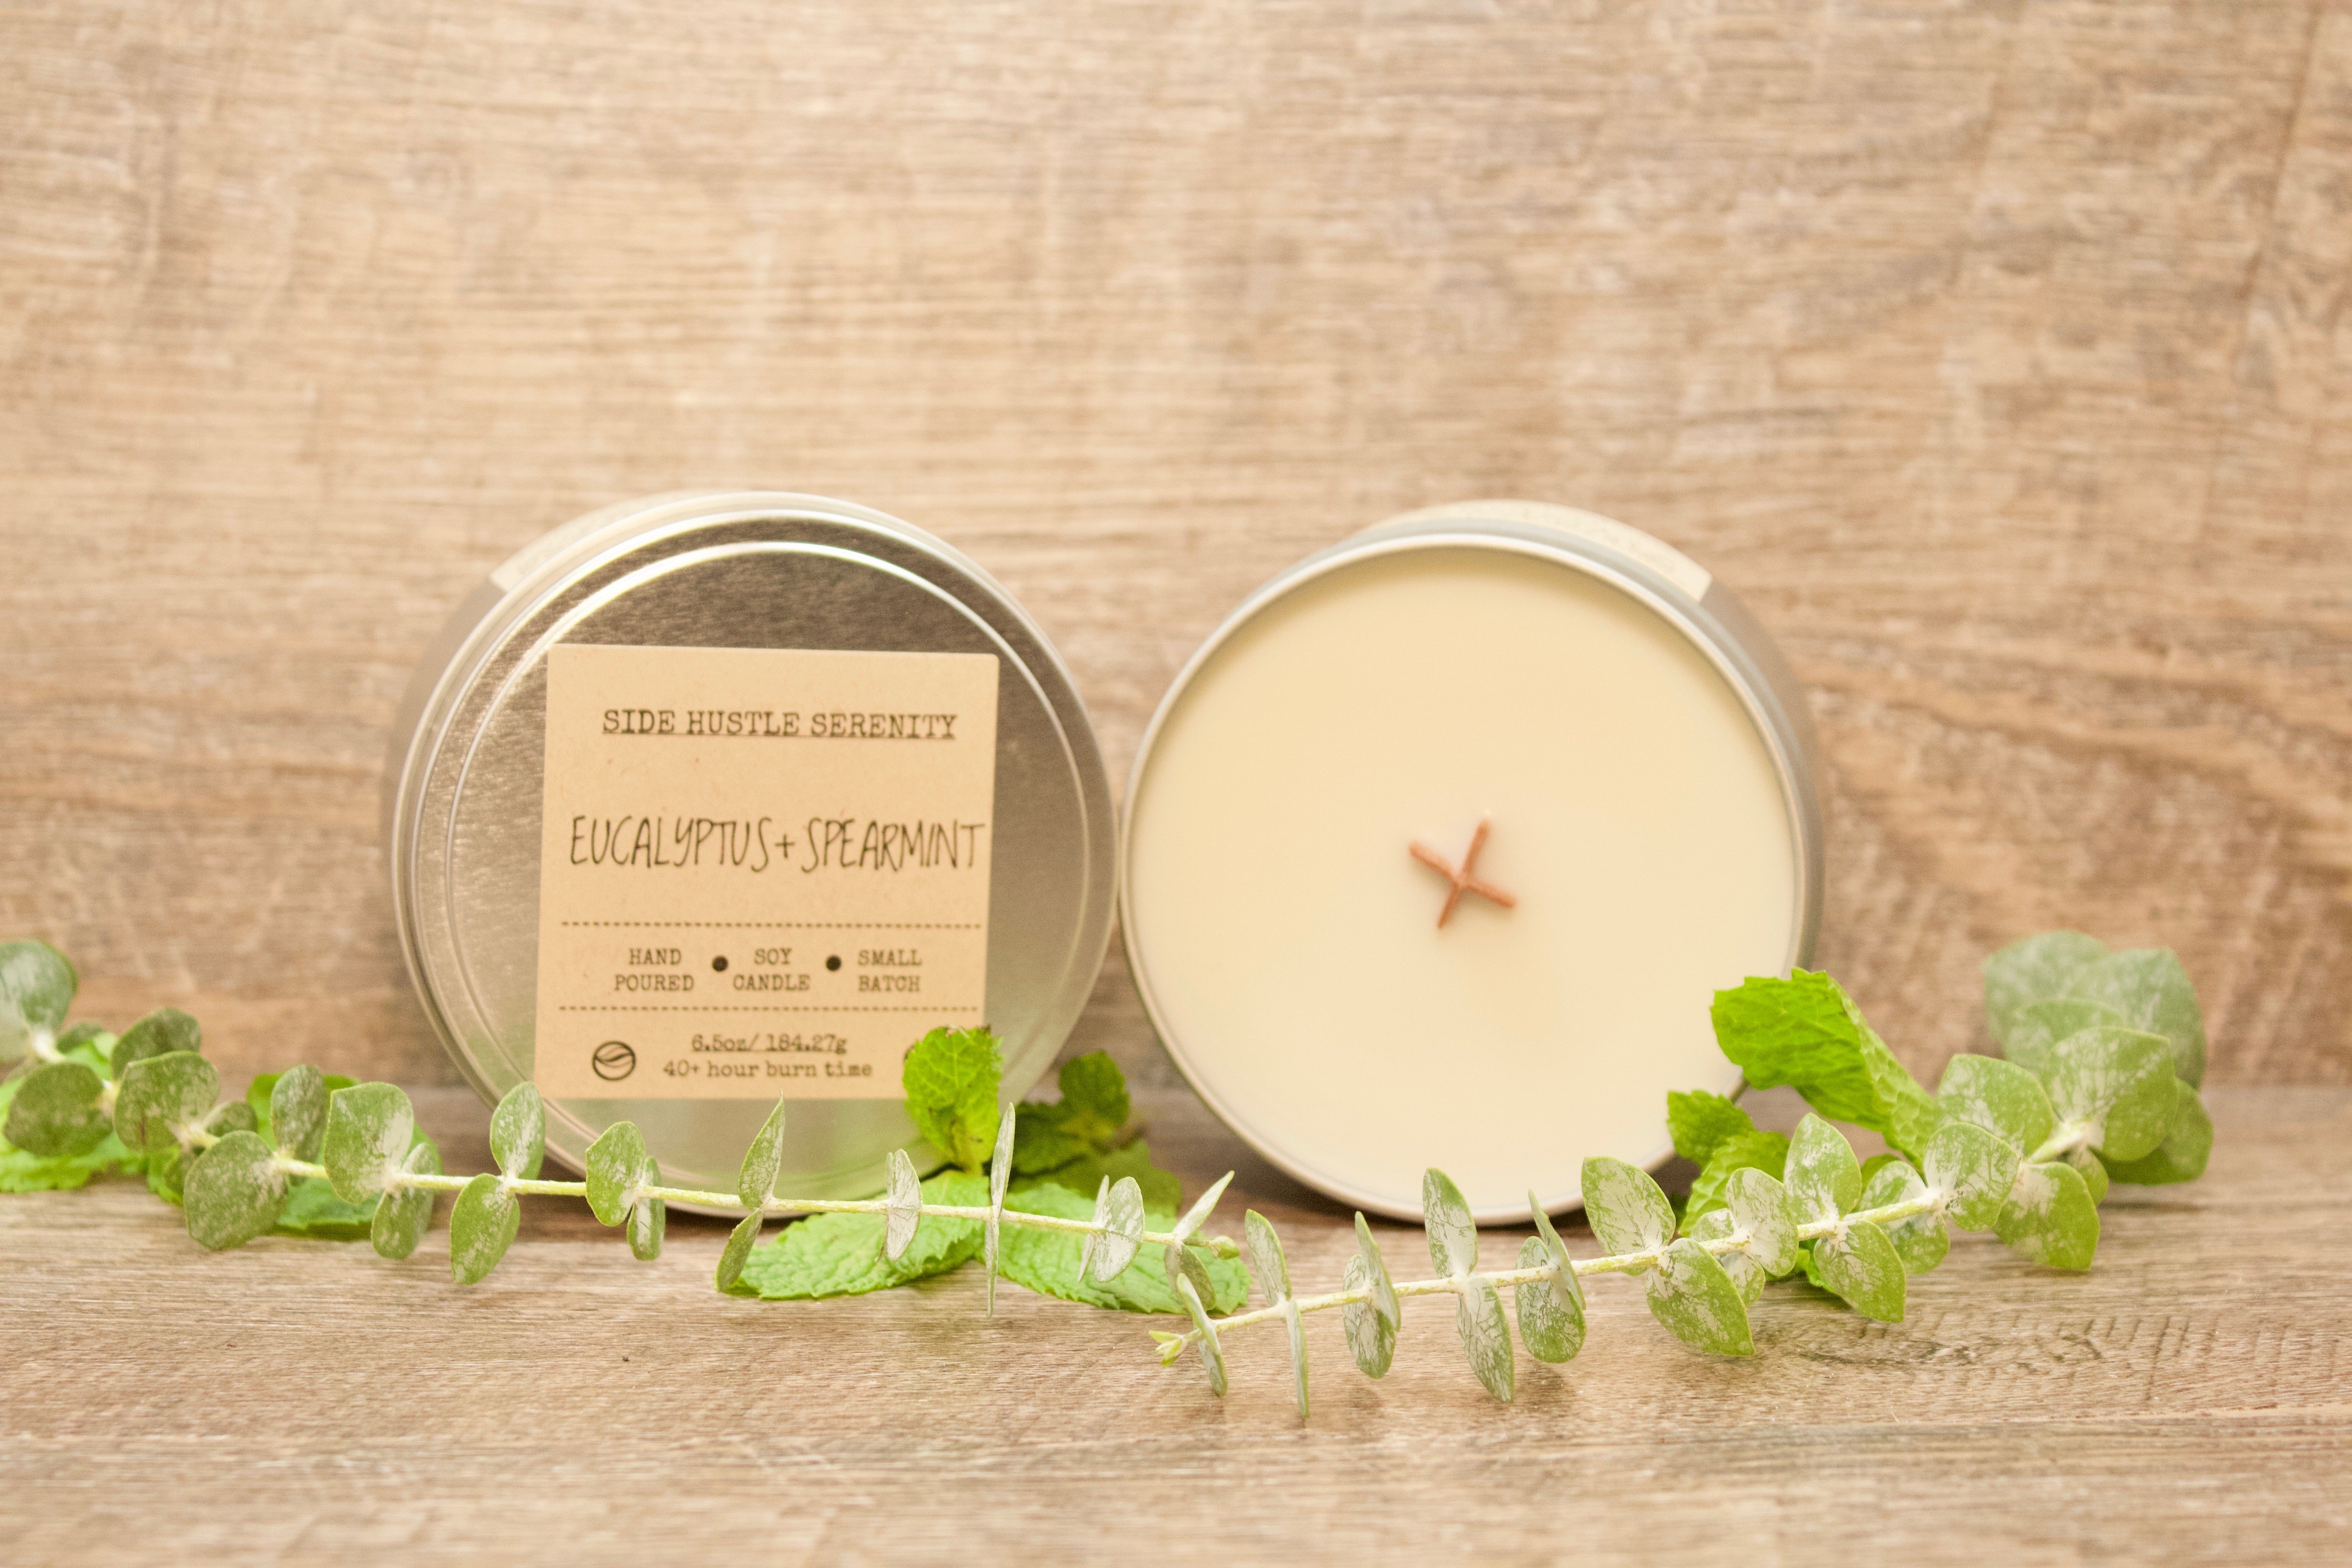 Eucalyptus + Spearmint Scented Soy Candle - Side Hustle Serenity